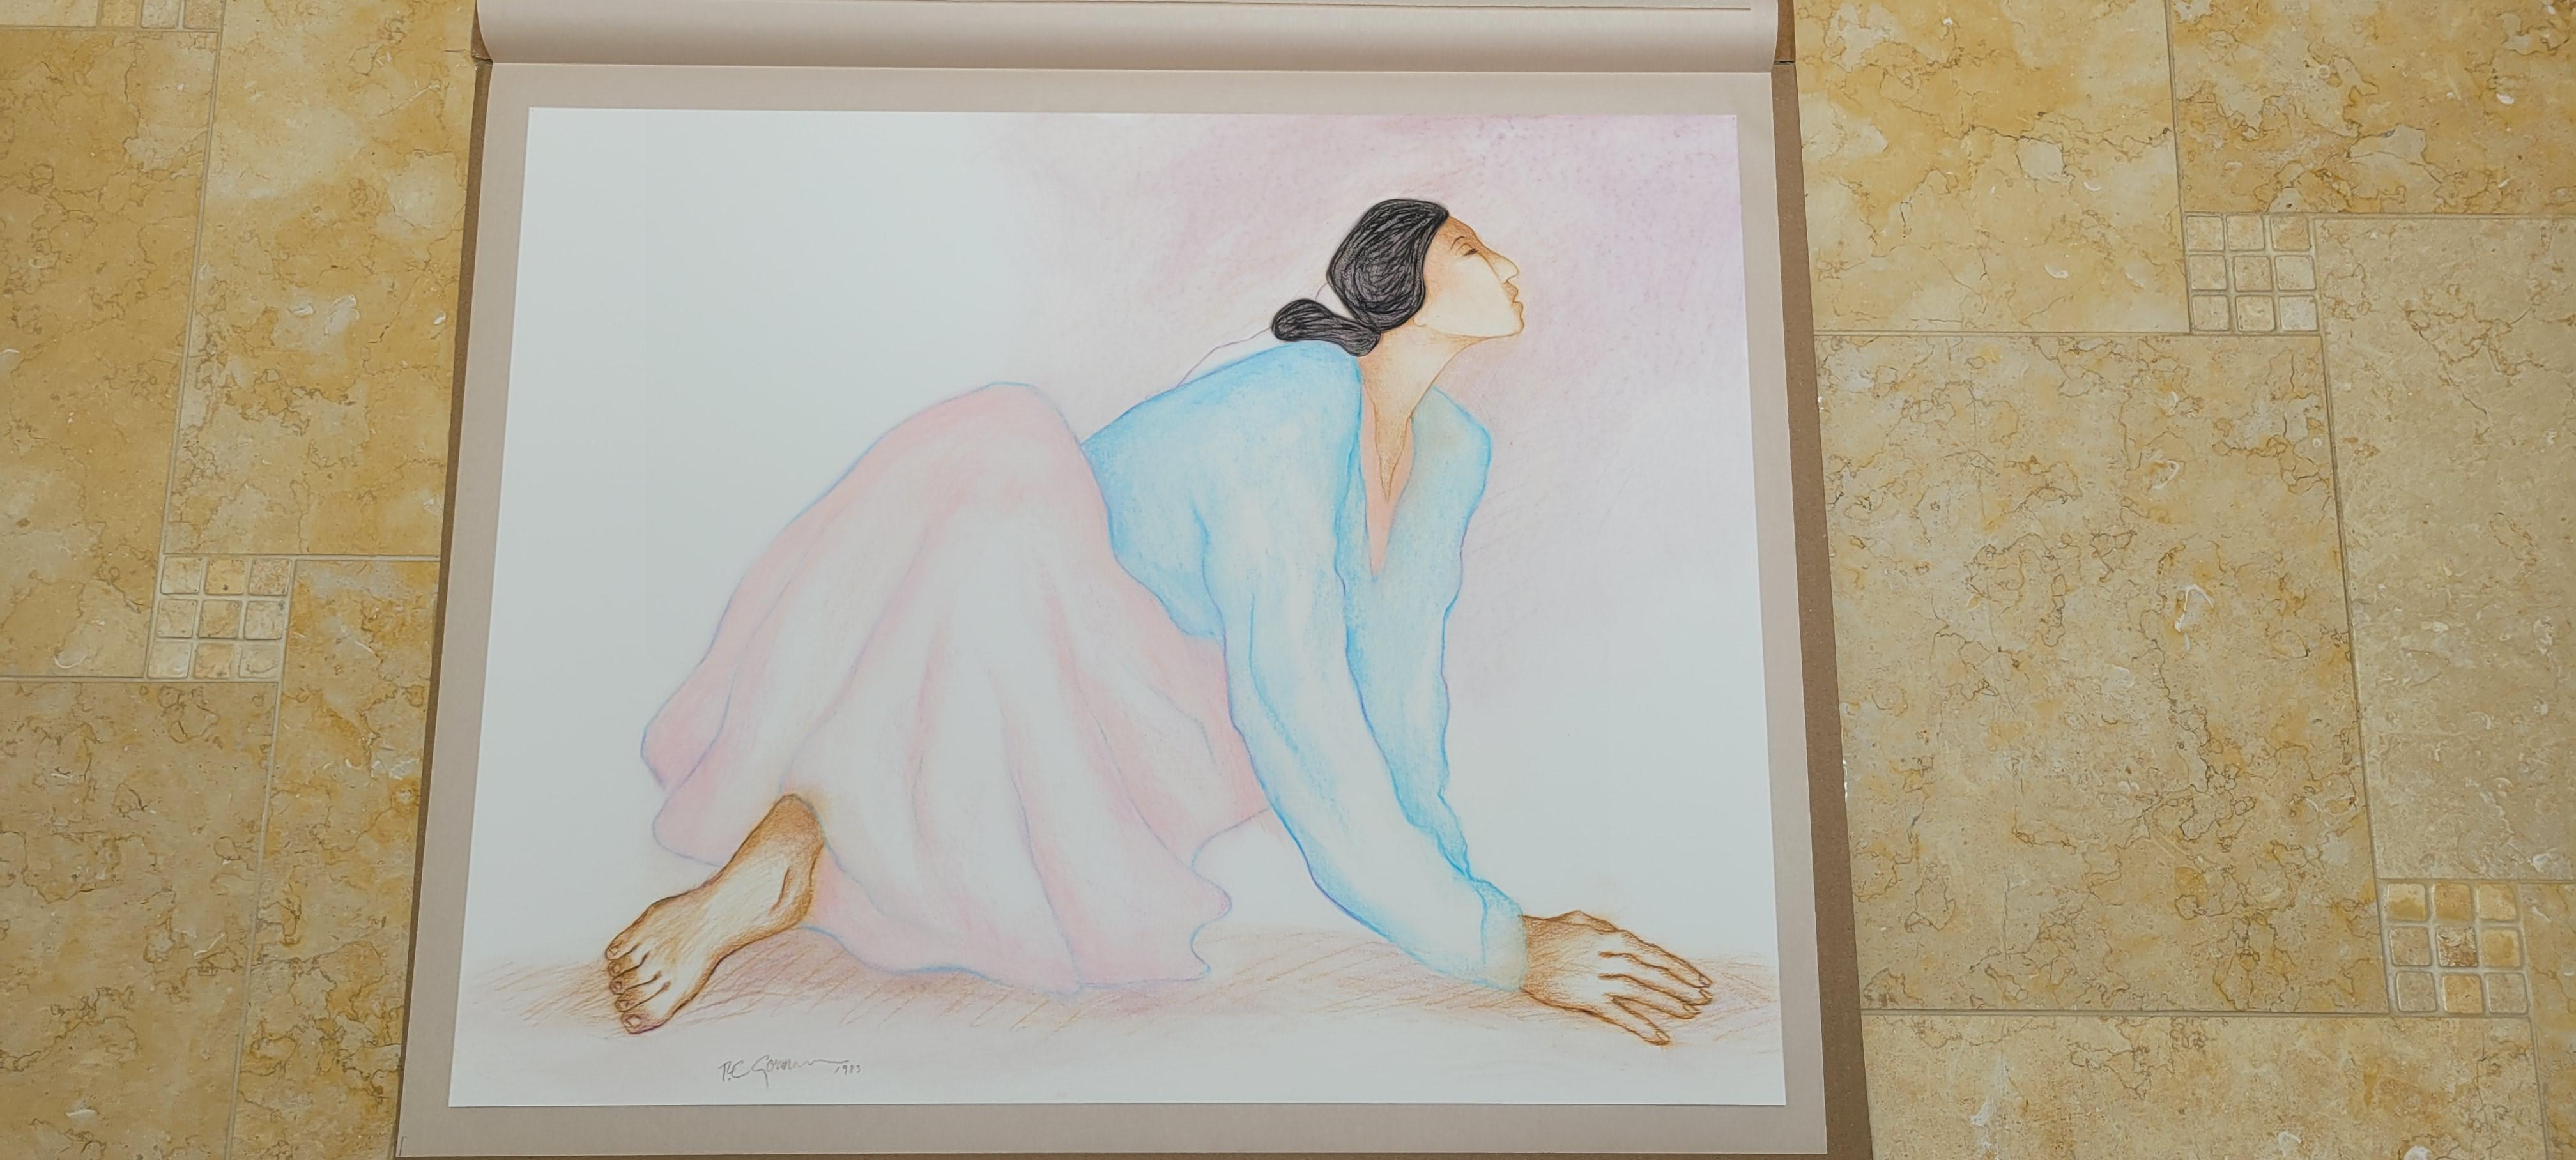 Late 20th Century R.C. Gorman - Woman with Pink Skirt and Light Blue Blouse - 1983 For Sale